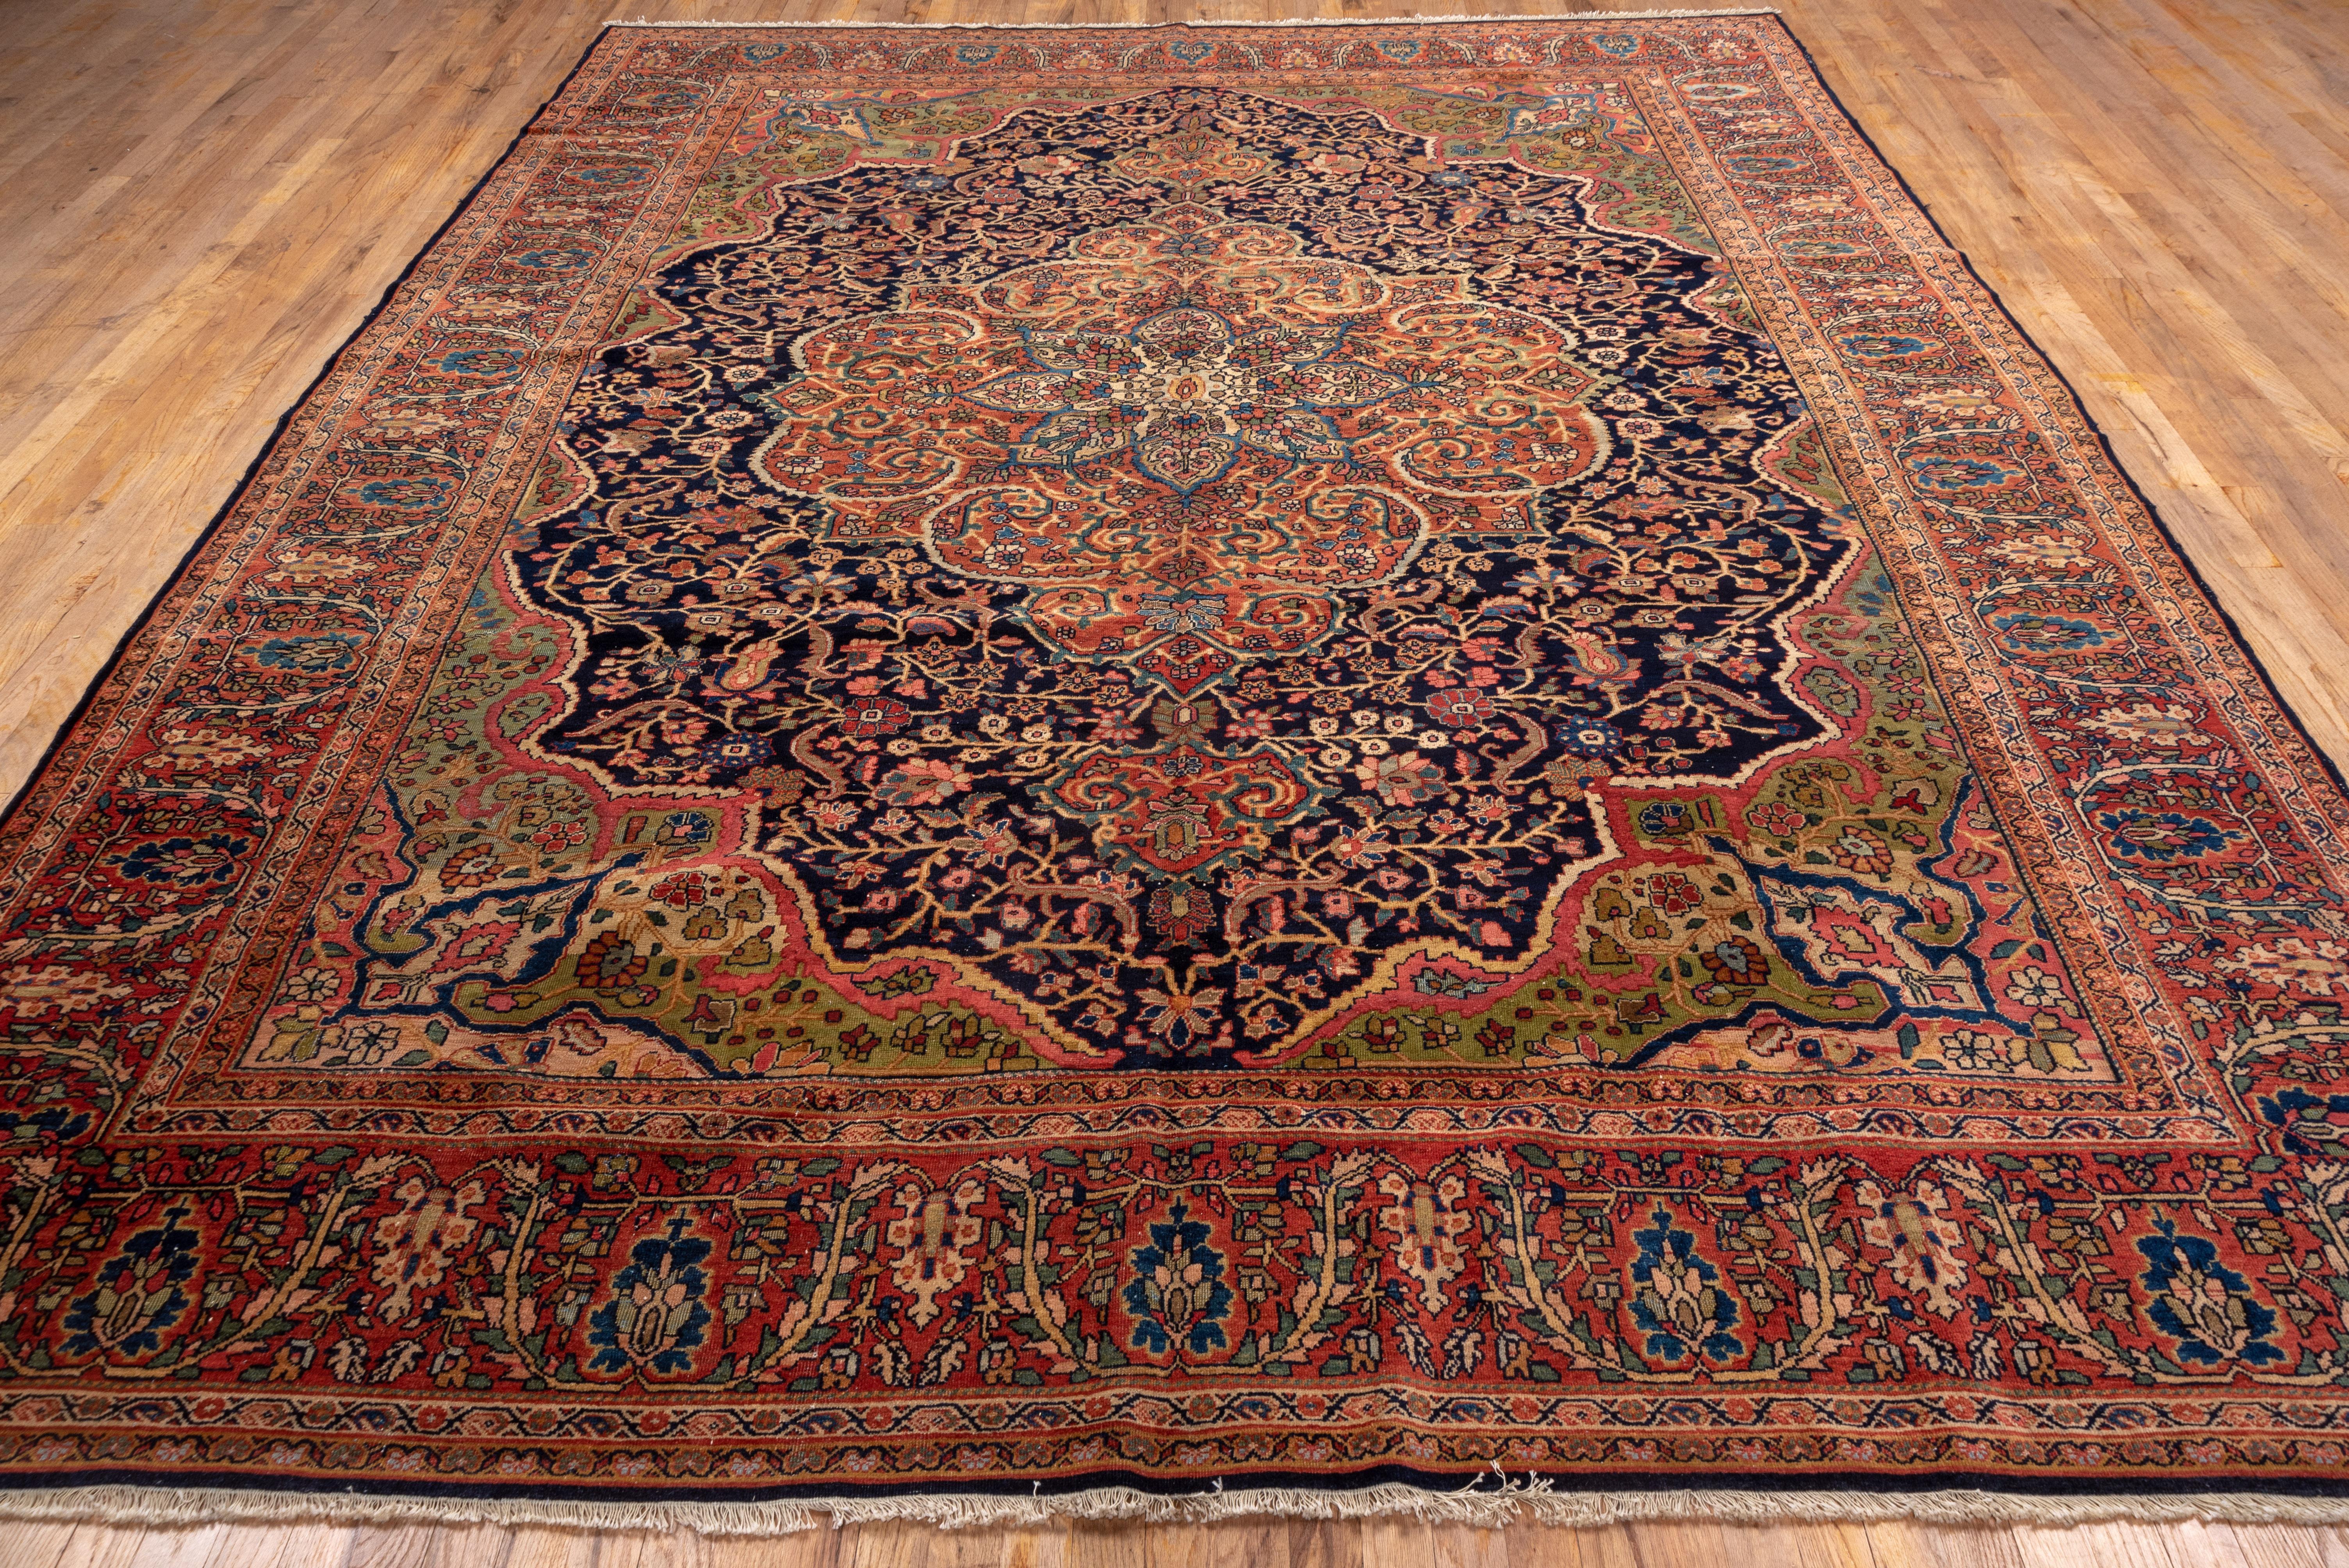 Hand-Knotted Antique Colorful Persian Sarouk Farahan Carpet, Colorful Palette